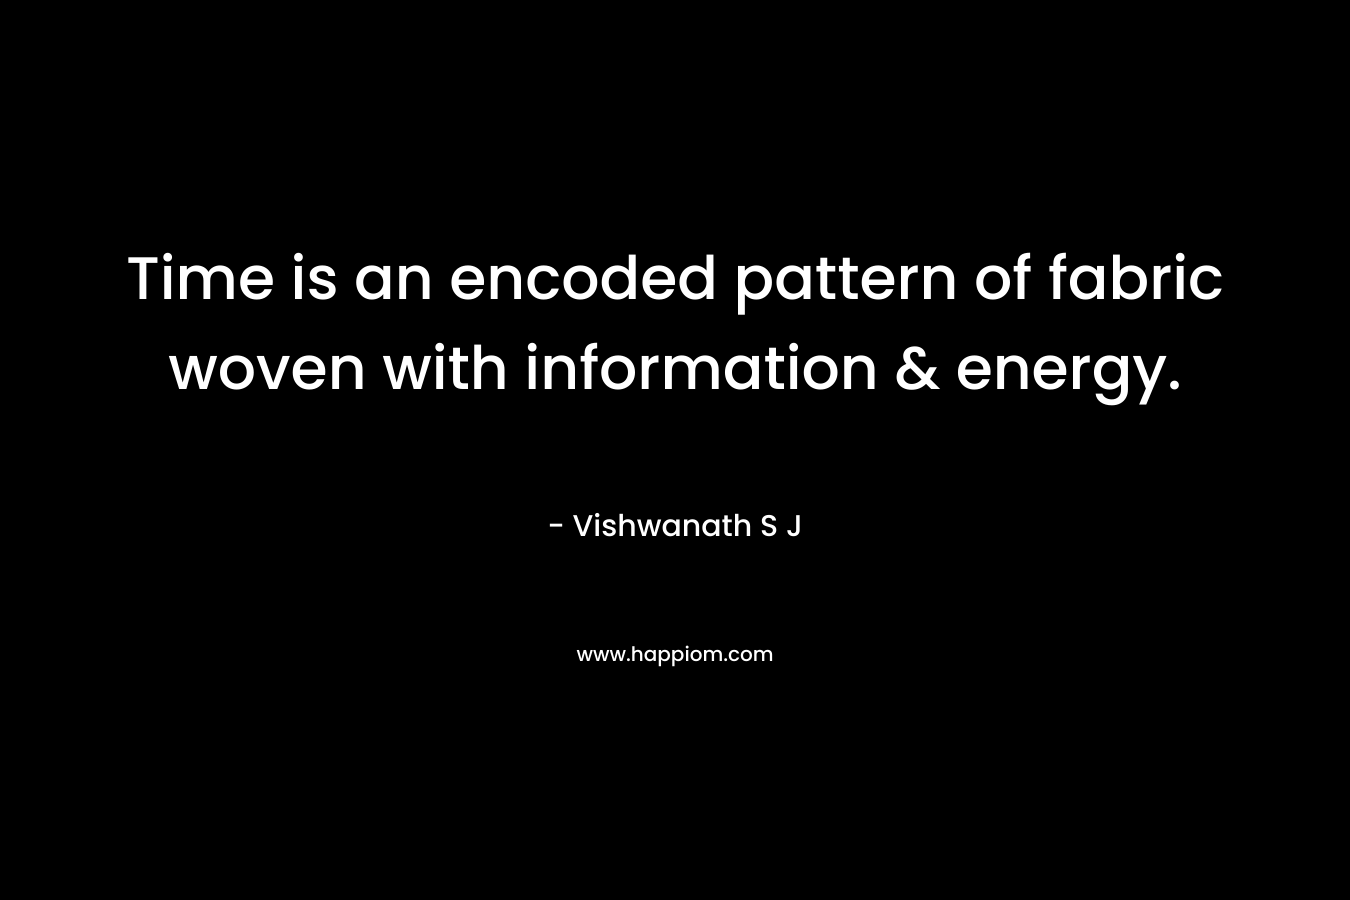 Time is an encoded pattern of fabric woven with information & energy. – Vishwanath S J